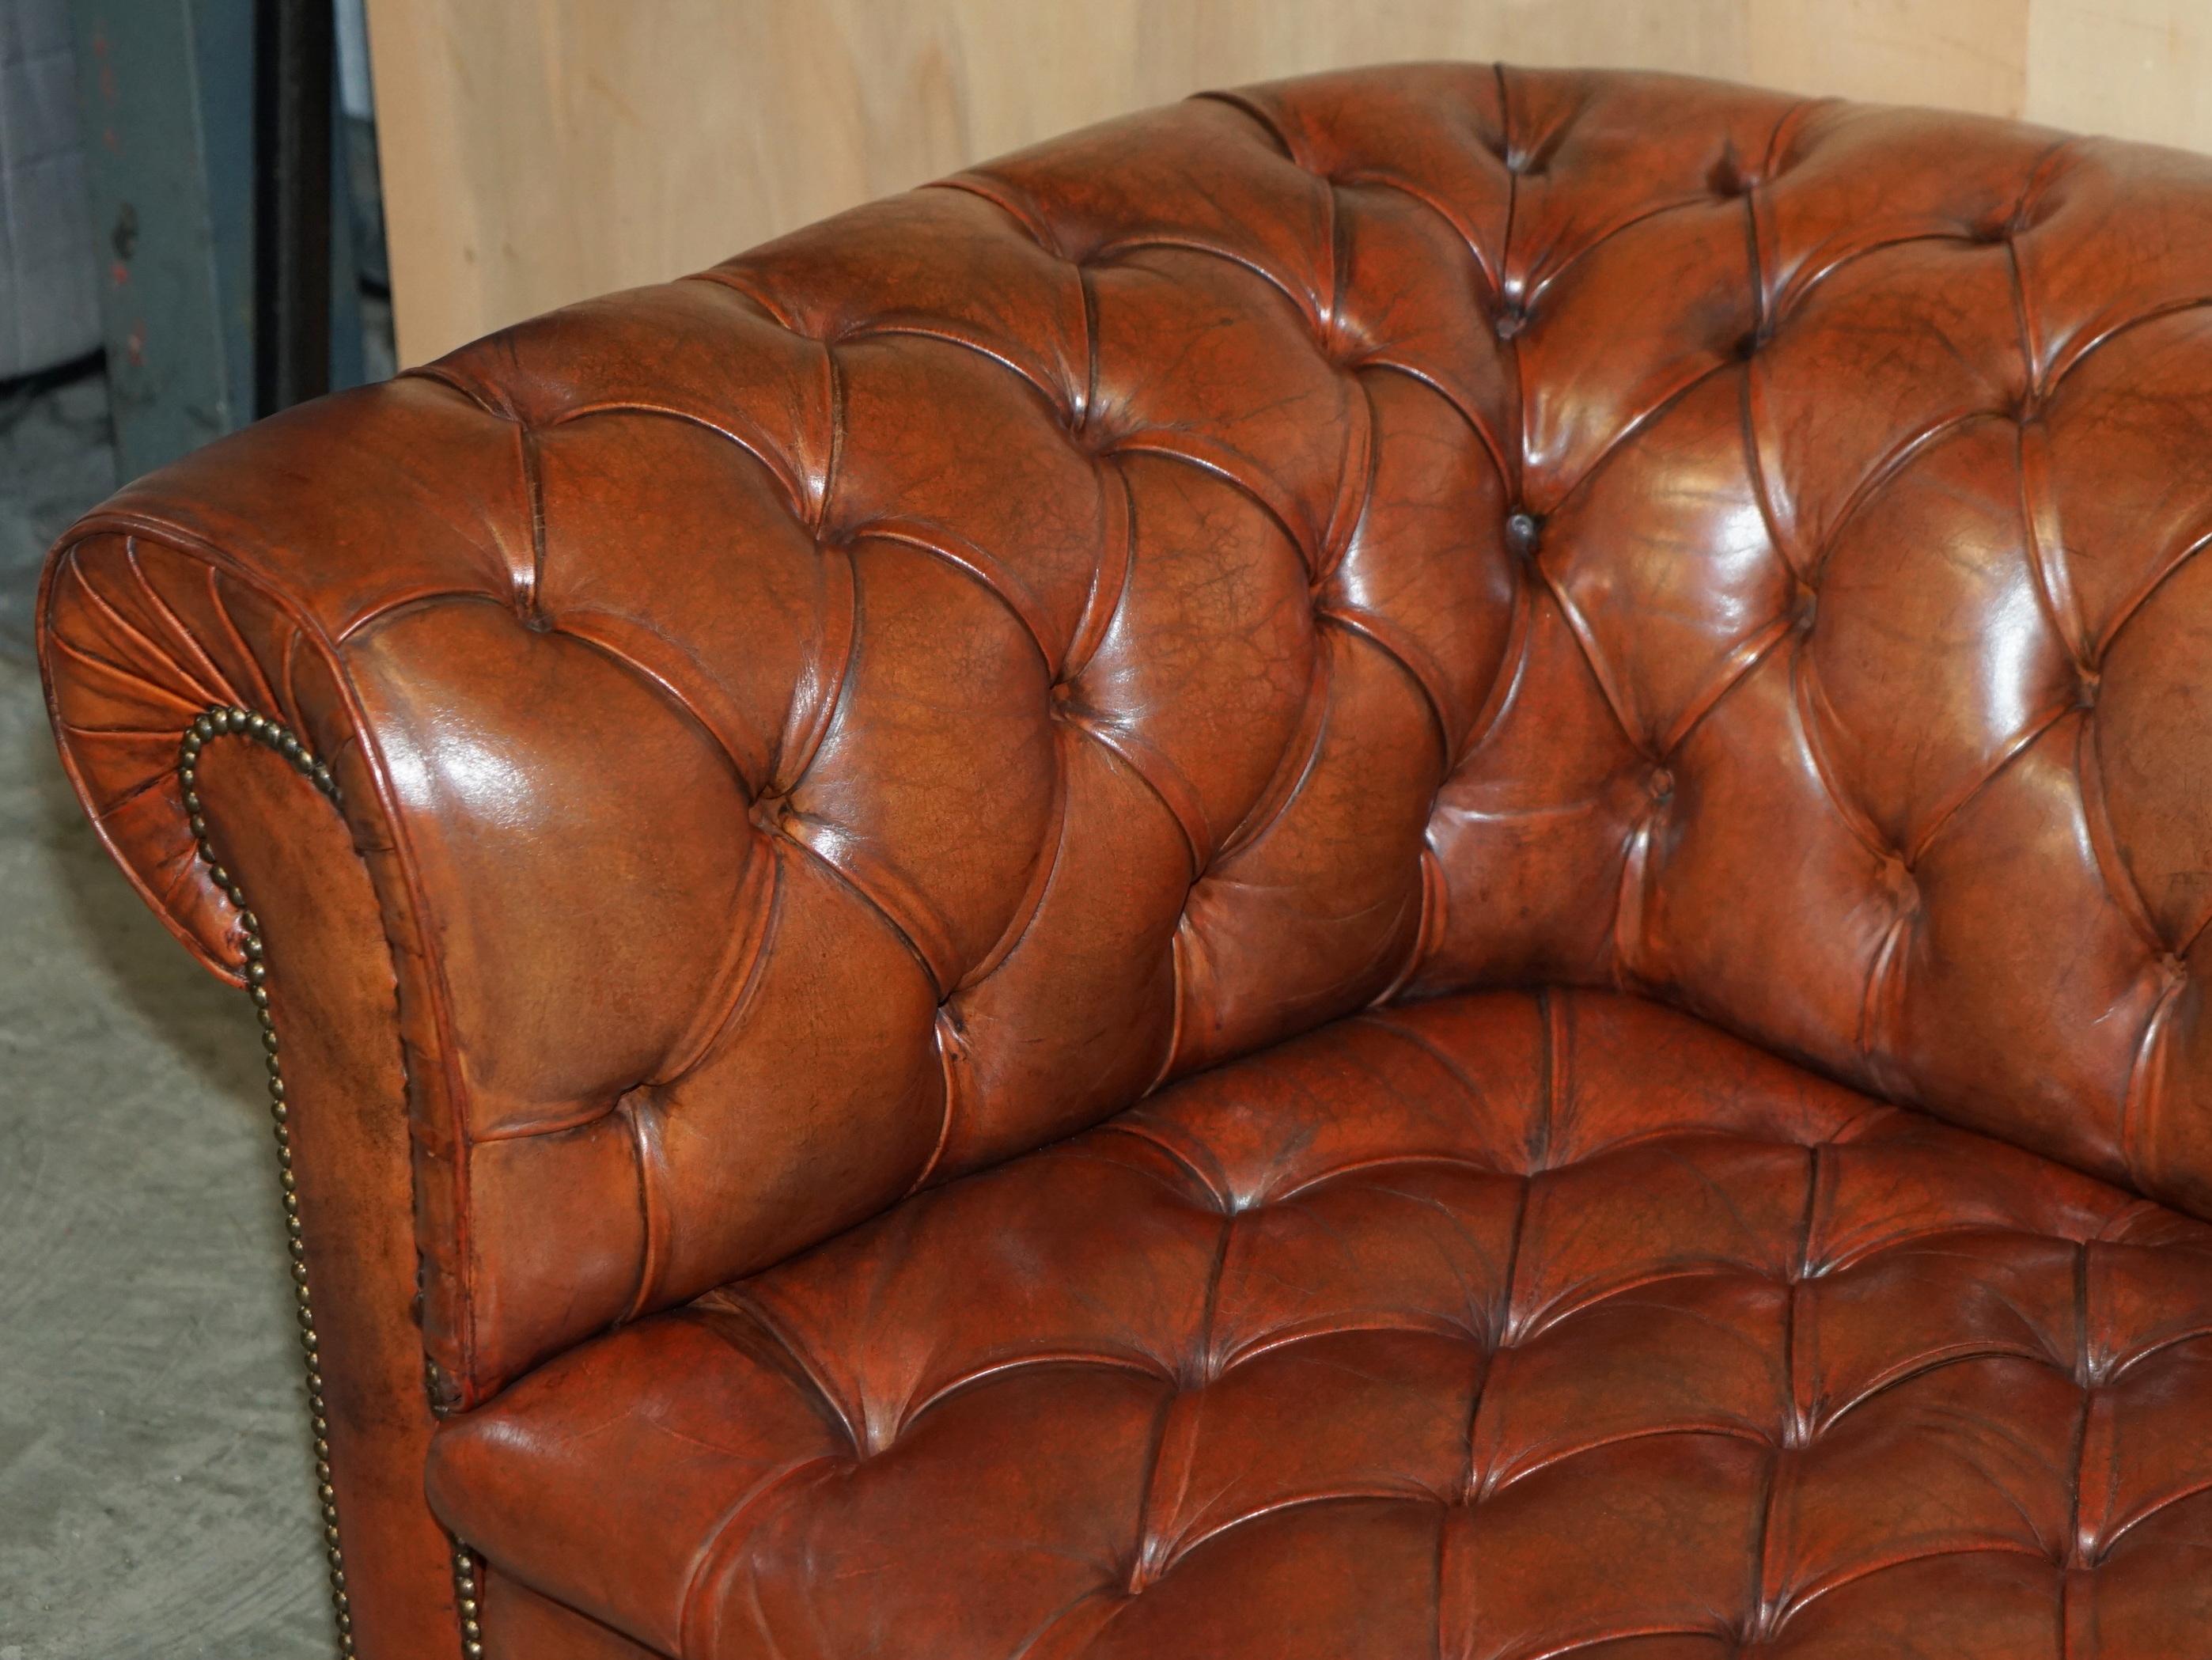 FULLY COIL SPRUNG VINTAGE 1920's HAND DYED BROWN LEATHER CHESTERFIELD CLUB SOFA For Sale 1